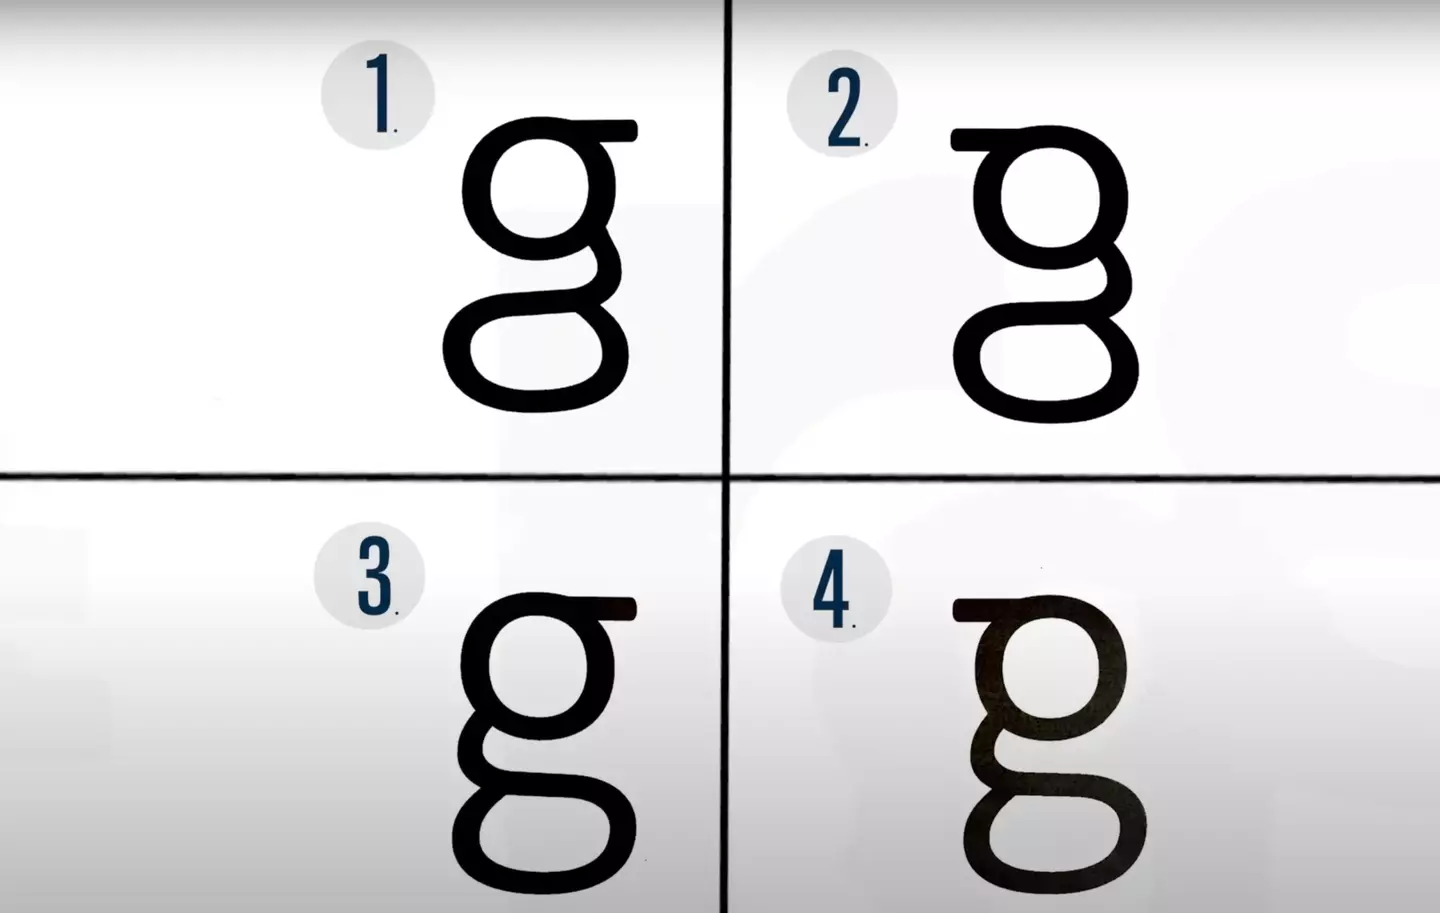 Do you know which G is the correct one?